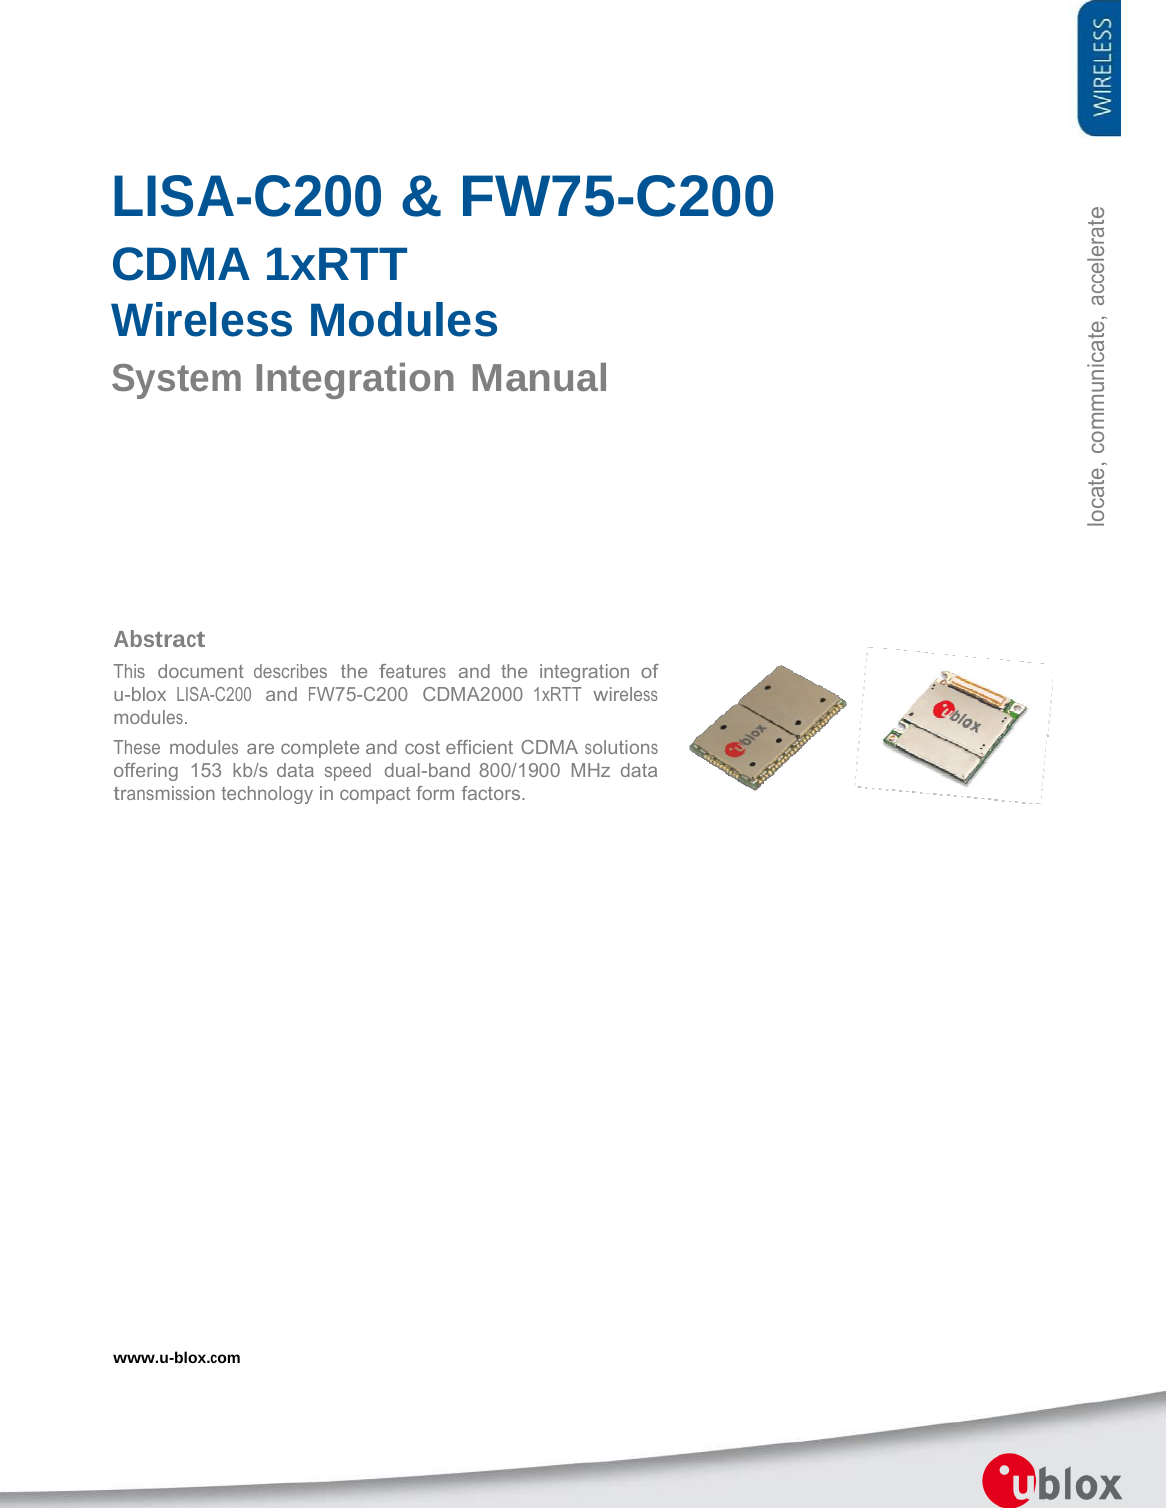 locate, communicate, accelerate  LISA-C200 &amp; FW75-C200 CDMA 1xRTT Wireless Modules System Integration Manual Abstract This  document describes  the features  and  the  integration of u-blox LISA-C200  and FW75-C200  CDMA2000 1xRTT wireless modules. These modules are complete and cost efficient CDMA solutions offering 153 kb/s data speed  dual-band 800/1900 MHz data transmission technology in compact form factors. www.u-blox.com 